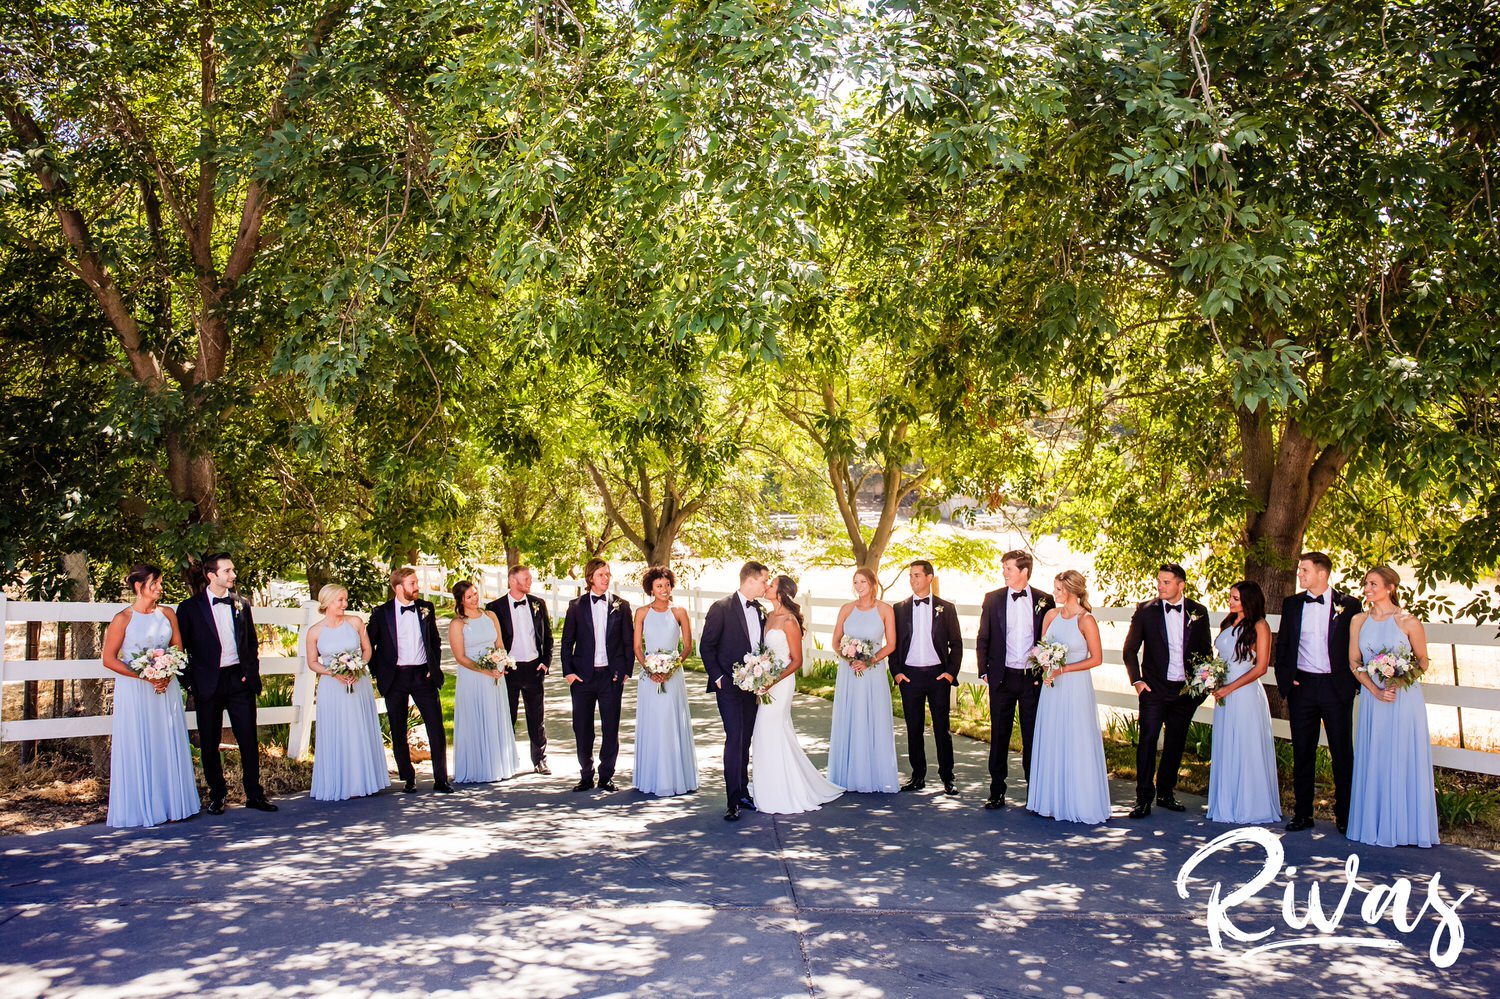 Saddlerock Ranch Summer Wedding | Destination Wedding Photographers | Rivas | A formal portrait of a wedding party dressed in light blue dresses and black tuxedos in the tree-lined driveway at Saddlerock Ranch in Malibu. 